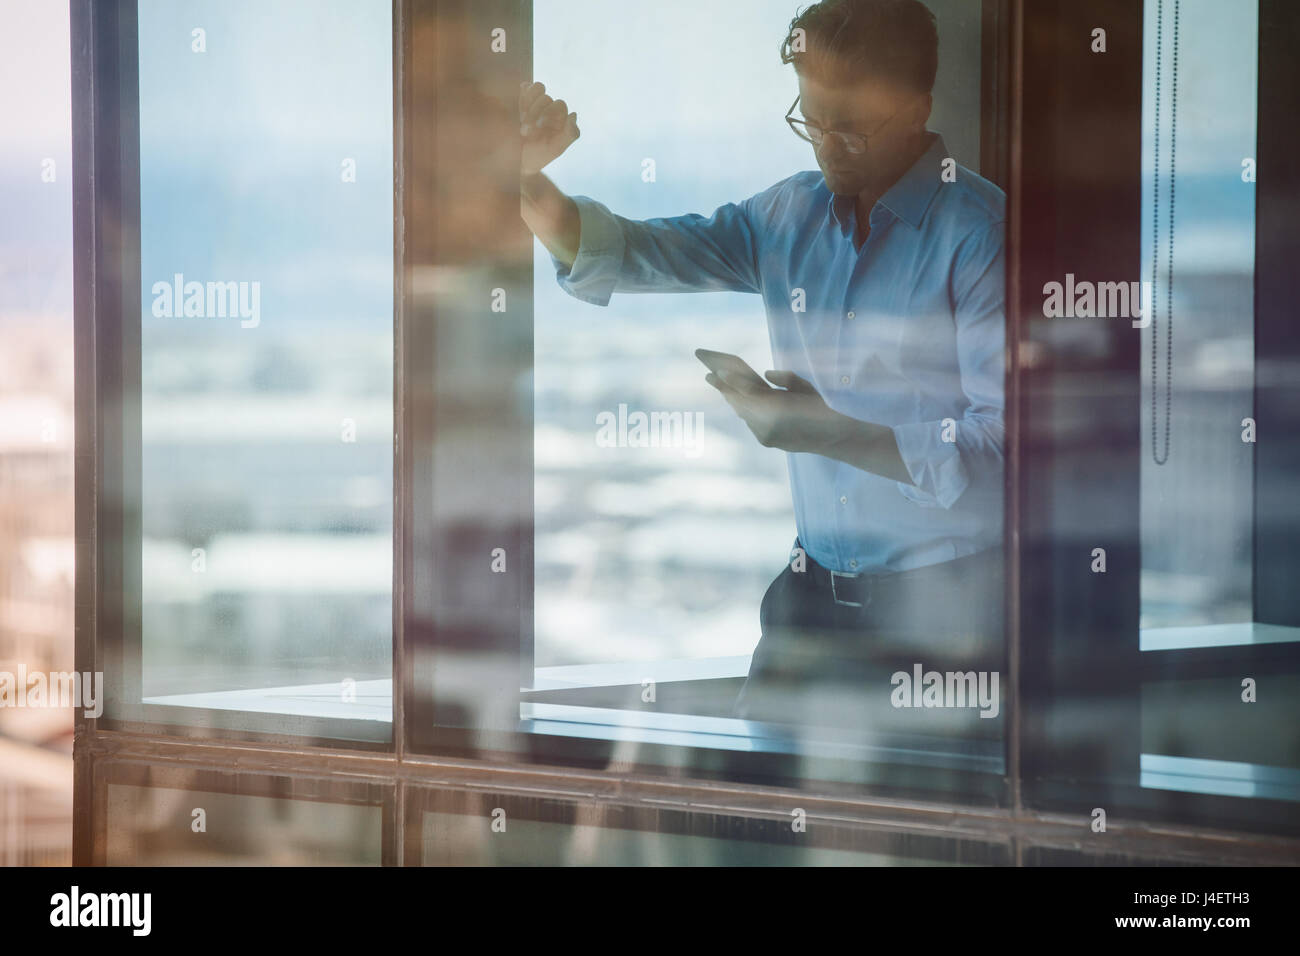 Mature businessman standing by window and reading text message on his mobile phone. Entrepreneur standing inside office building and using smart phone Stock Photo